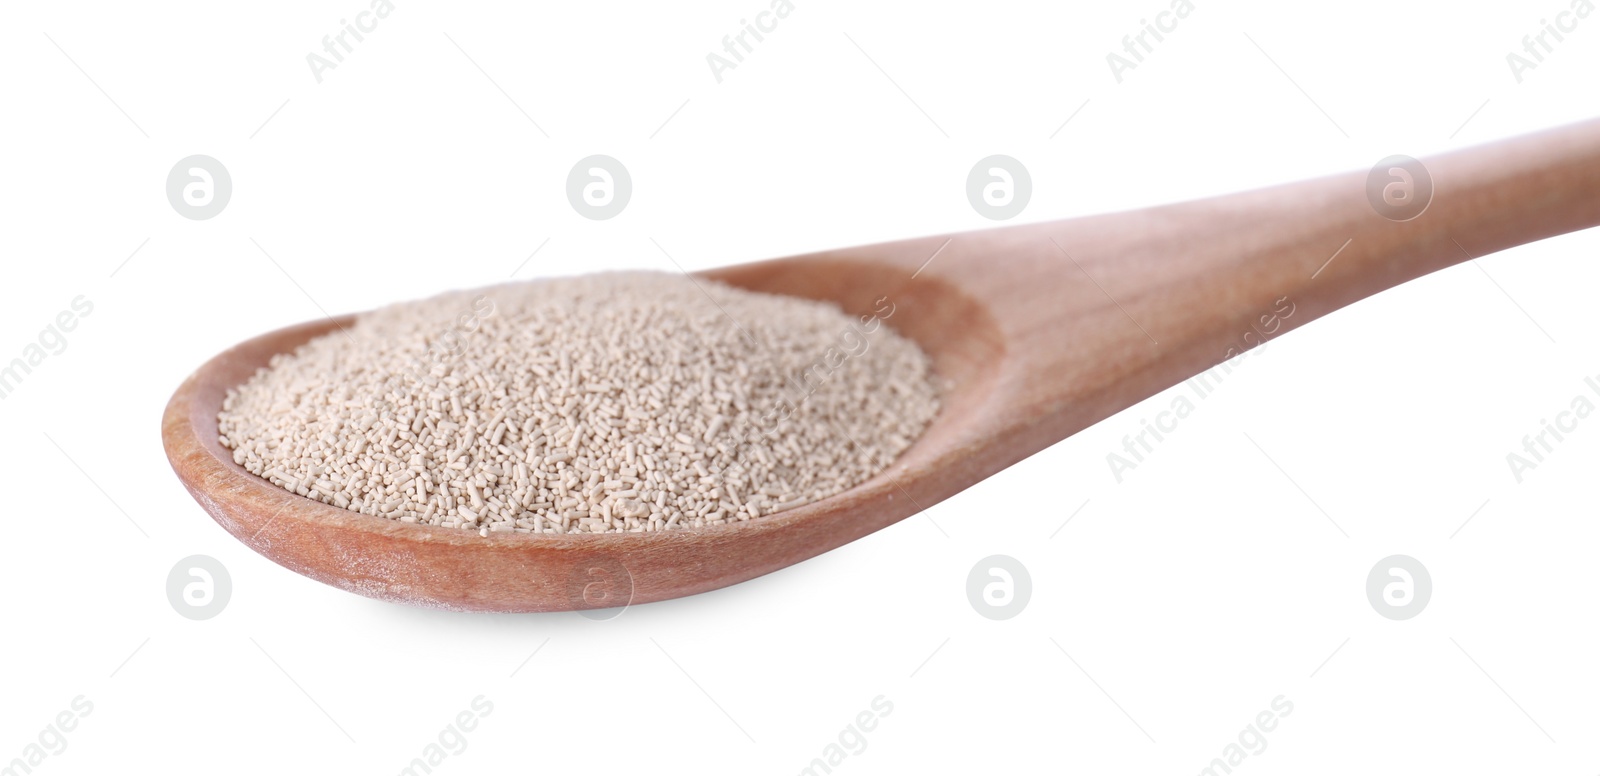 Photo of Spoon with active dry yeast isolated on white